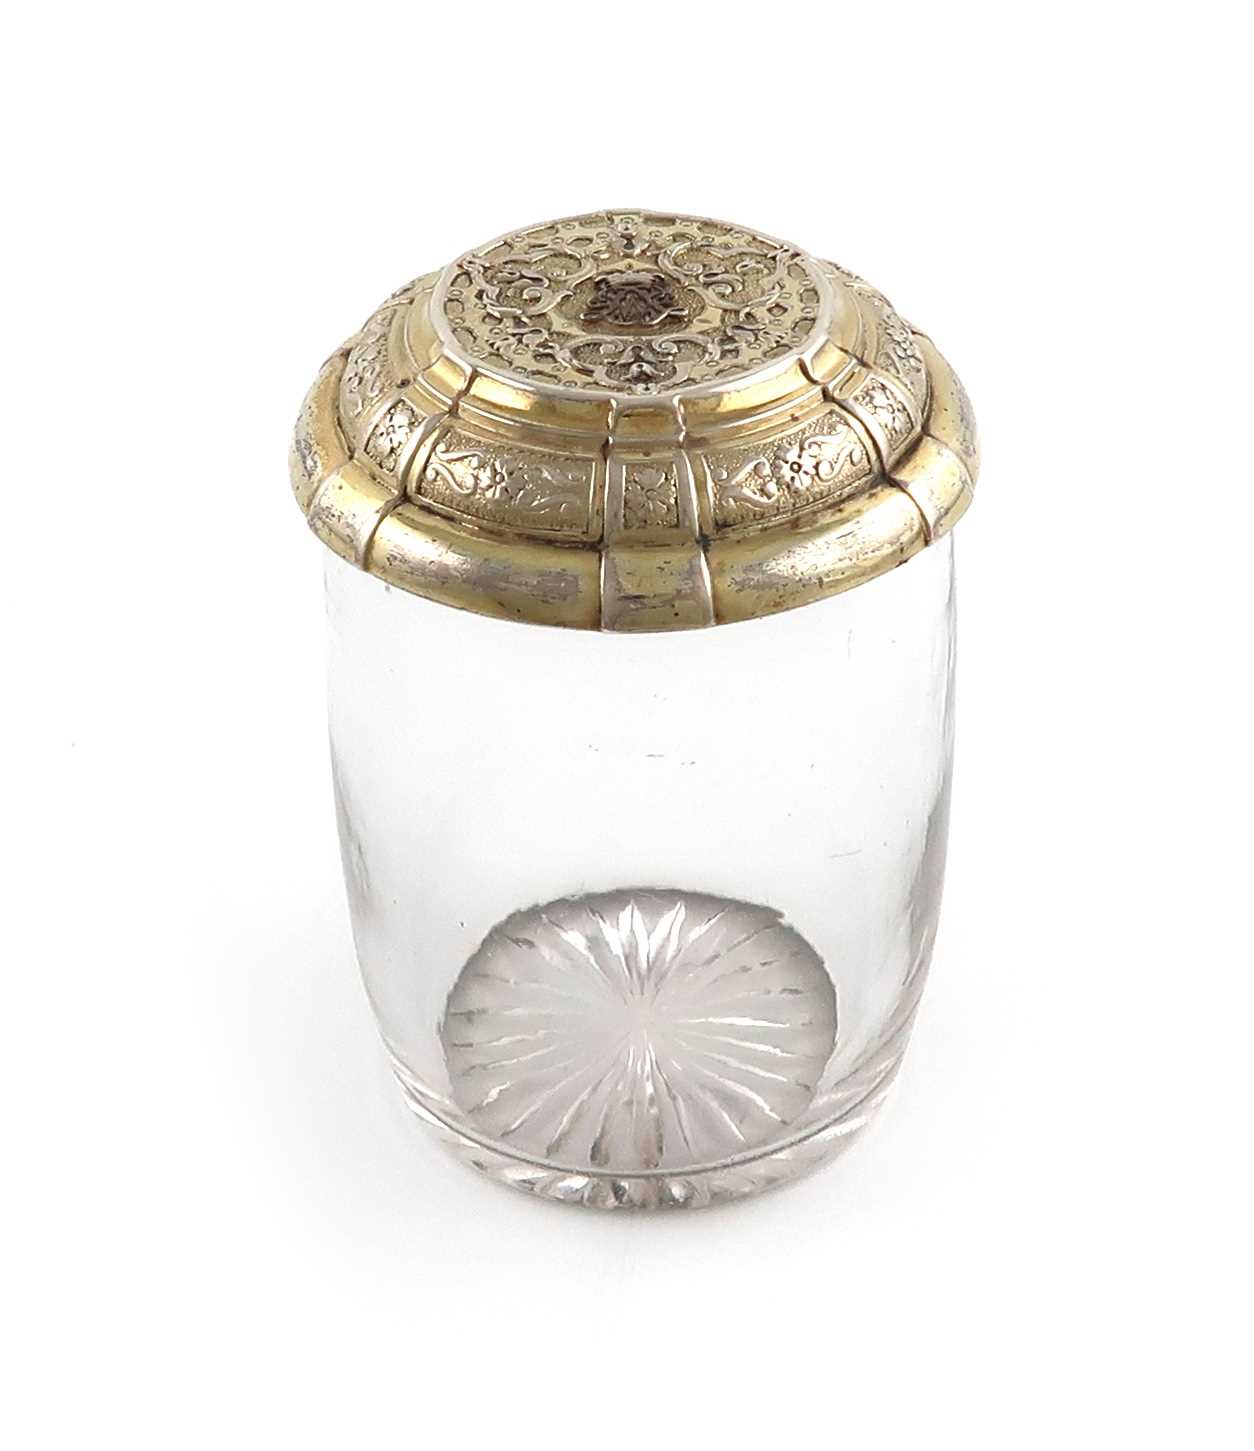 A Victorian silver-gilt mounted toilet jar,by Robert Garrard, London 1841,cylindrical form, the